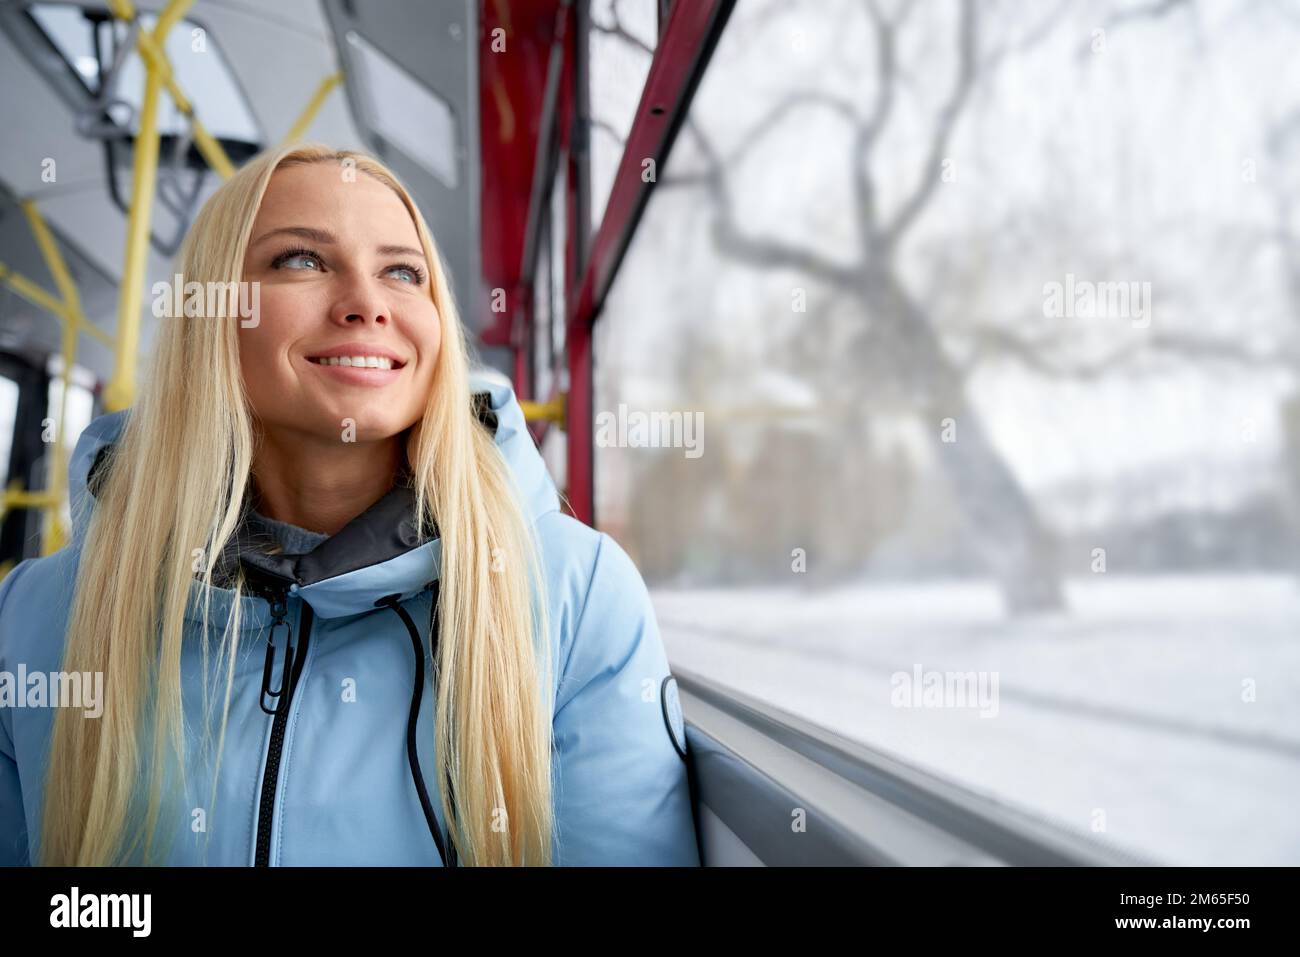 Front view of pretty, blonde woman with long hair sitting on bus, waiting, looking through window. Young female smiling, traveling by public transport Stock Photo